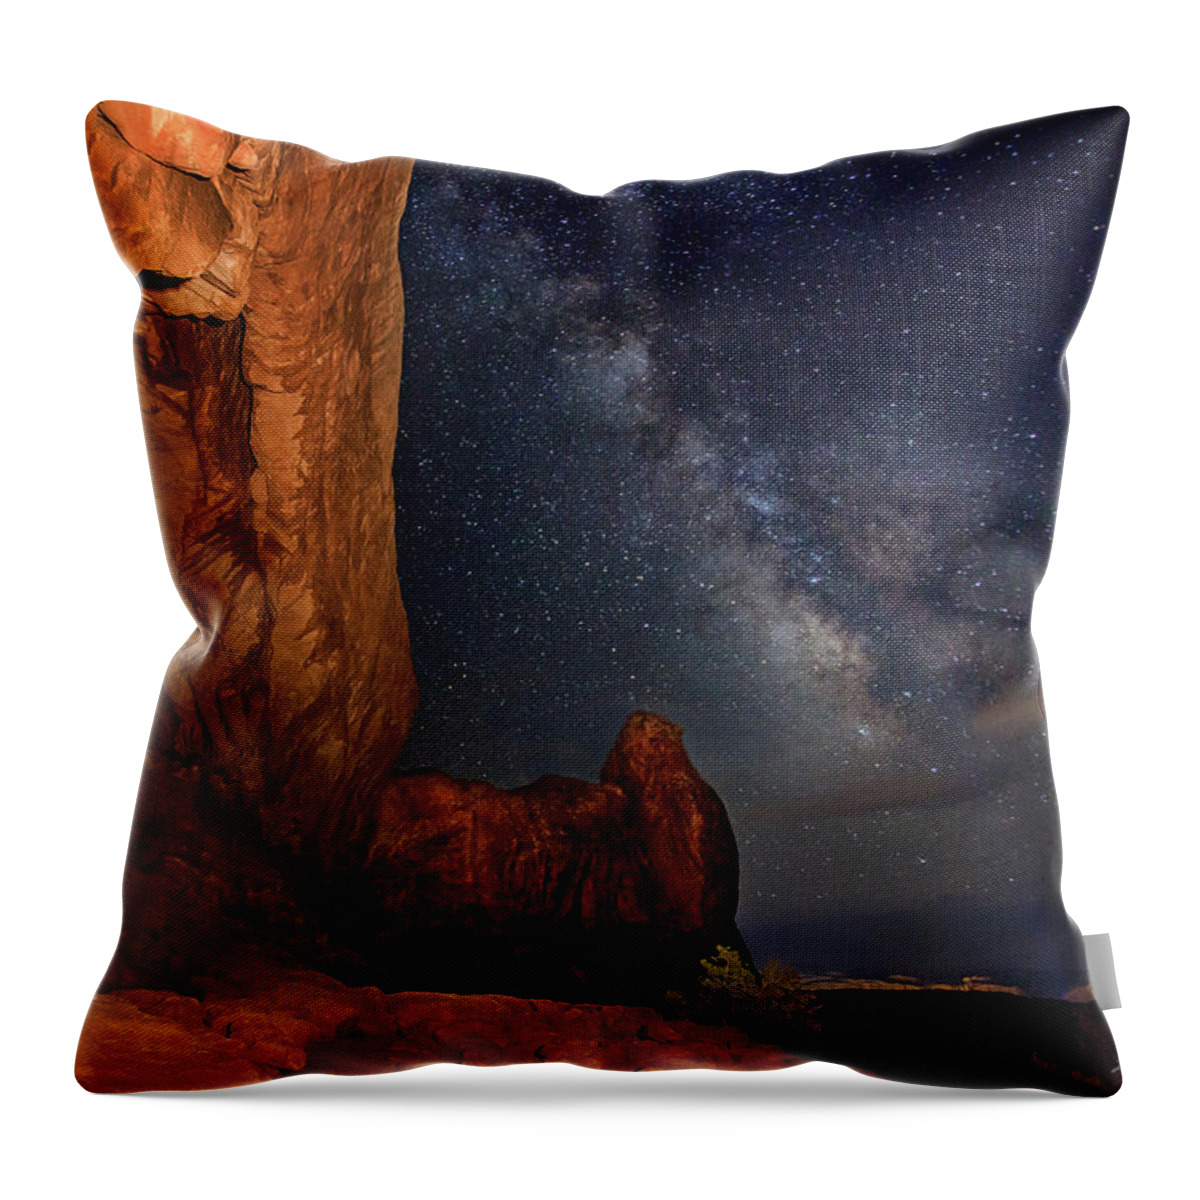 Arches National Park Throw Pillow featuring the photograph North Window and The Milky Way by Dan Norris